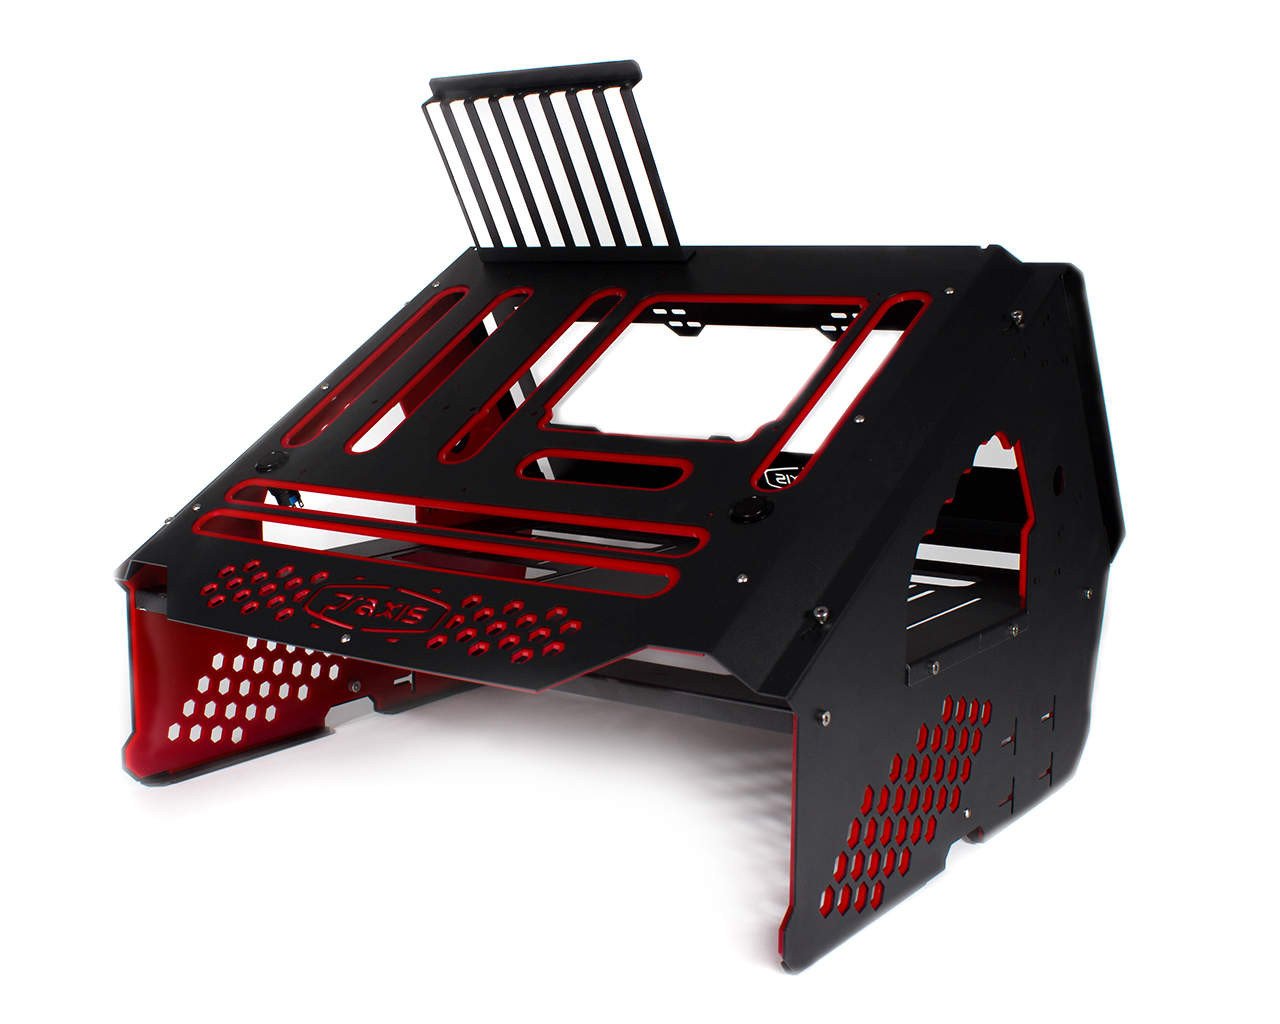 Praxis WetBench - PrimoChill - KEEPING IT COOL Black w/ Solid Red Accents